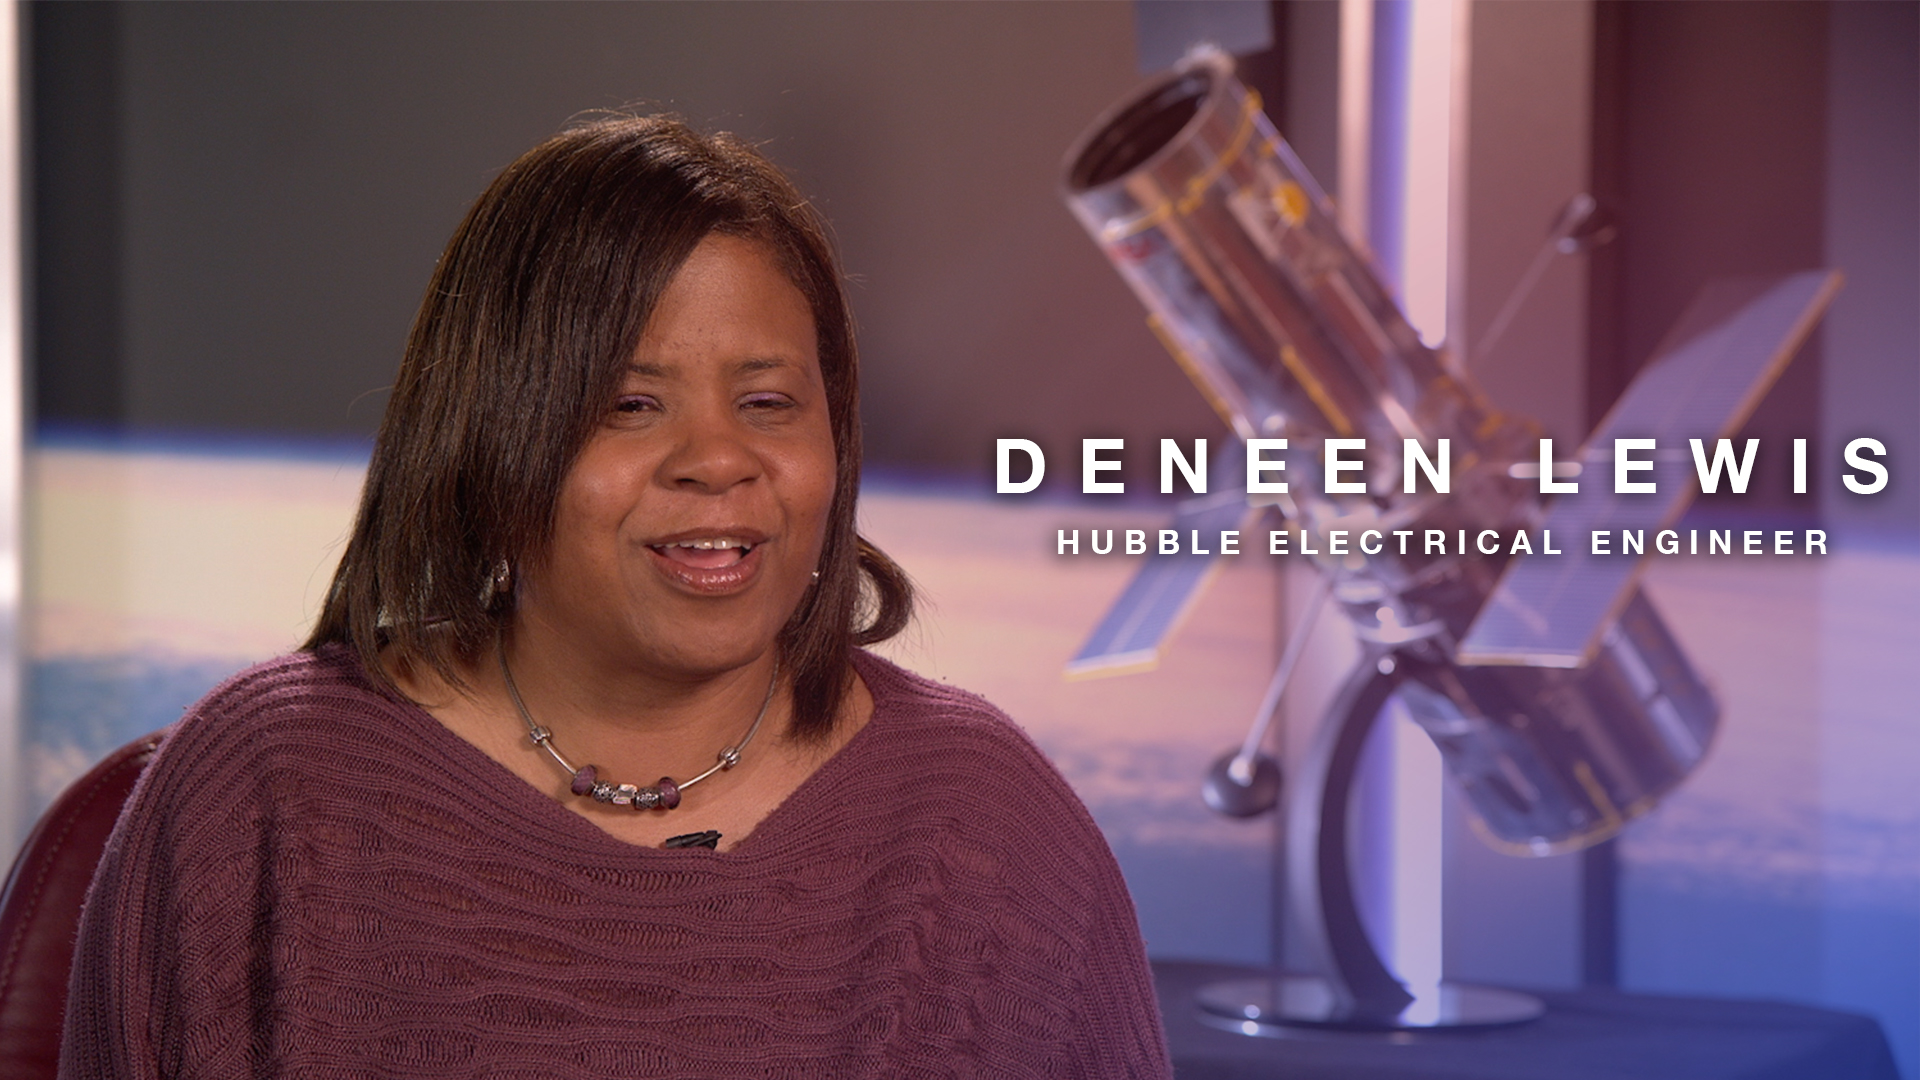 Preview Image for Deneen Lewis: Hubble Electrical Engineer